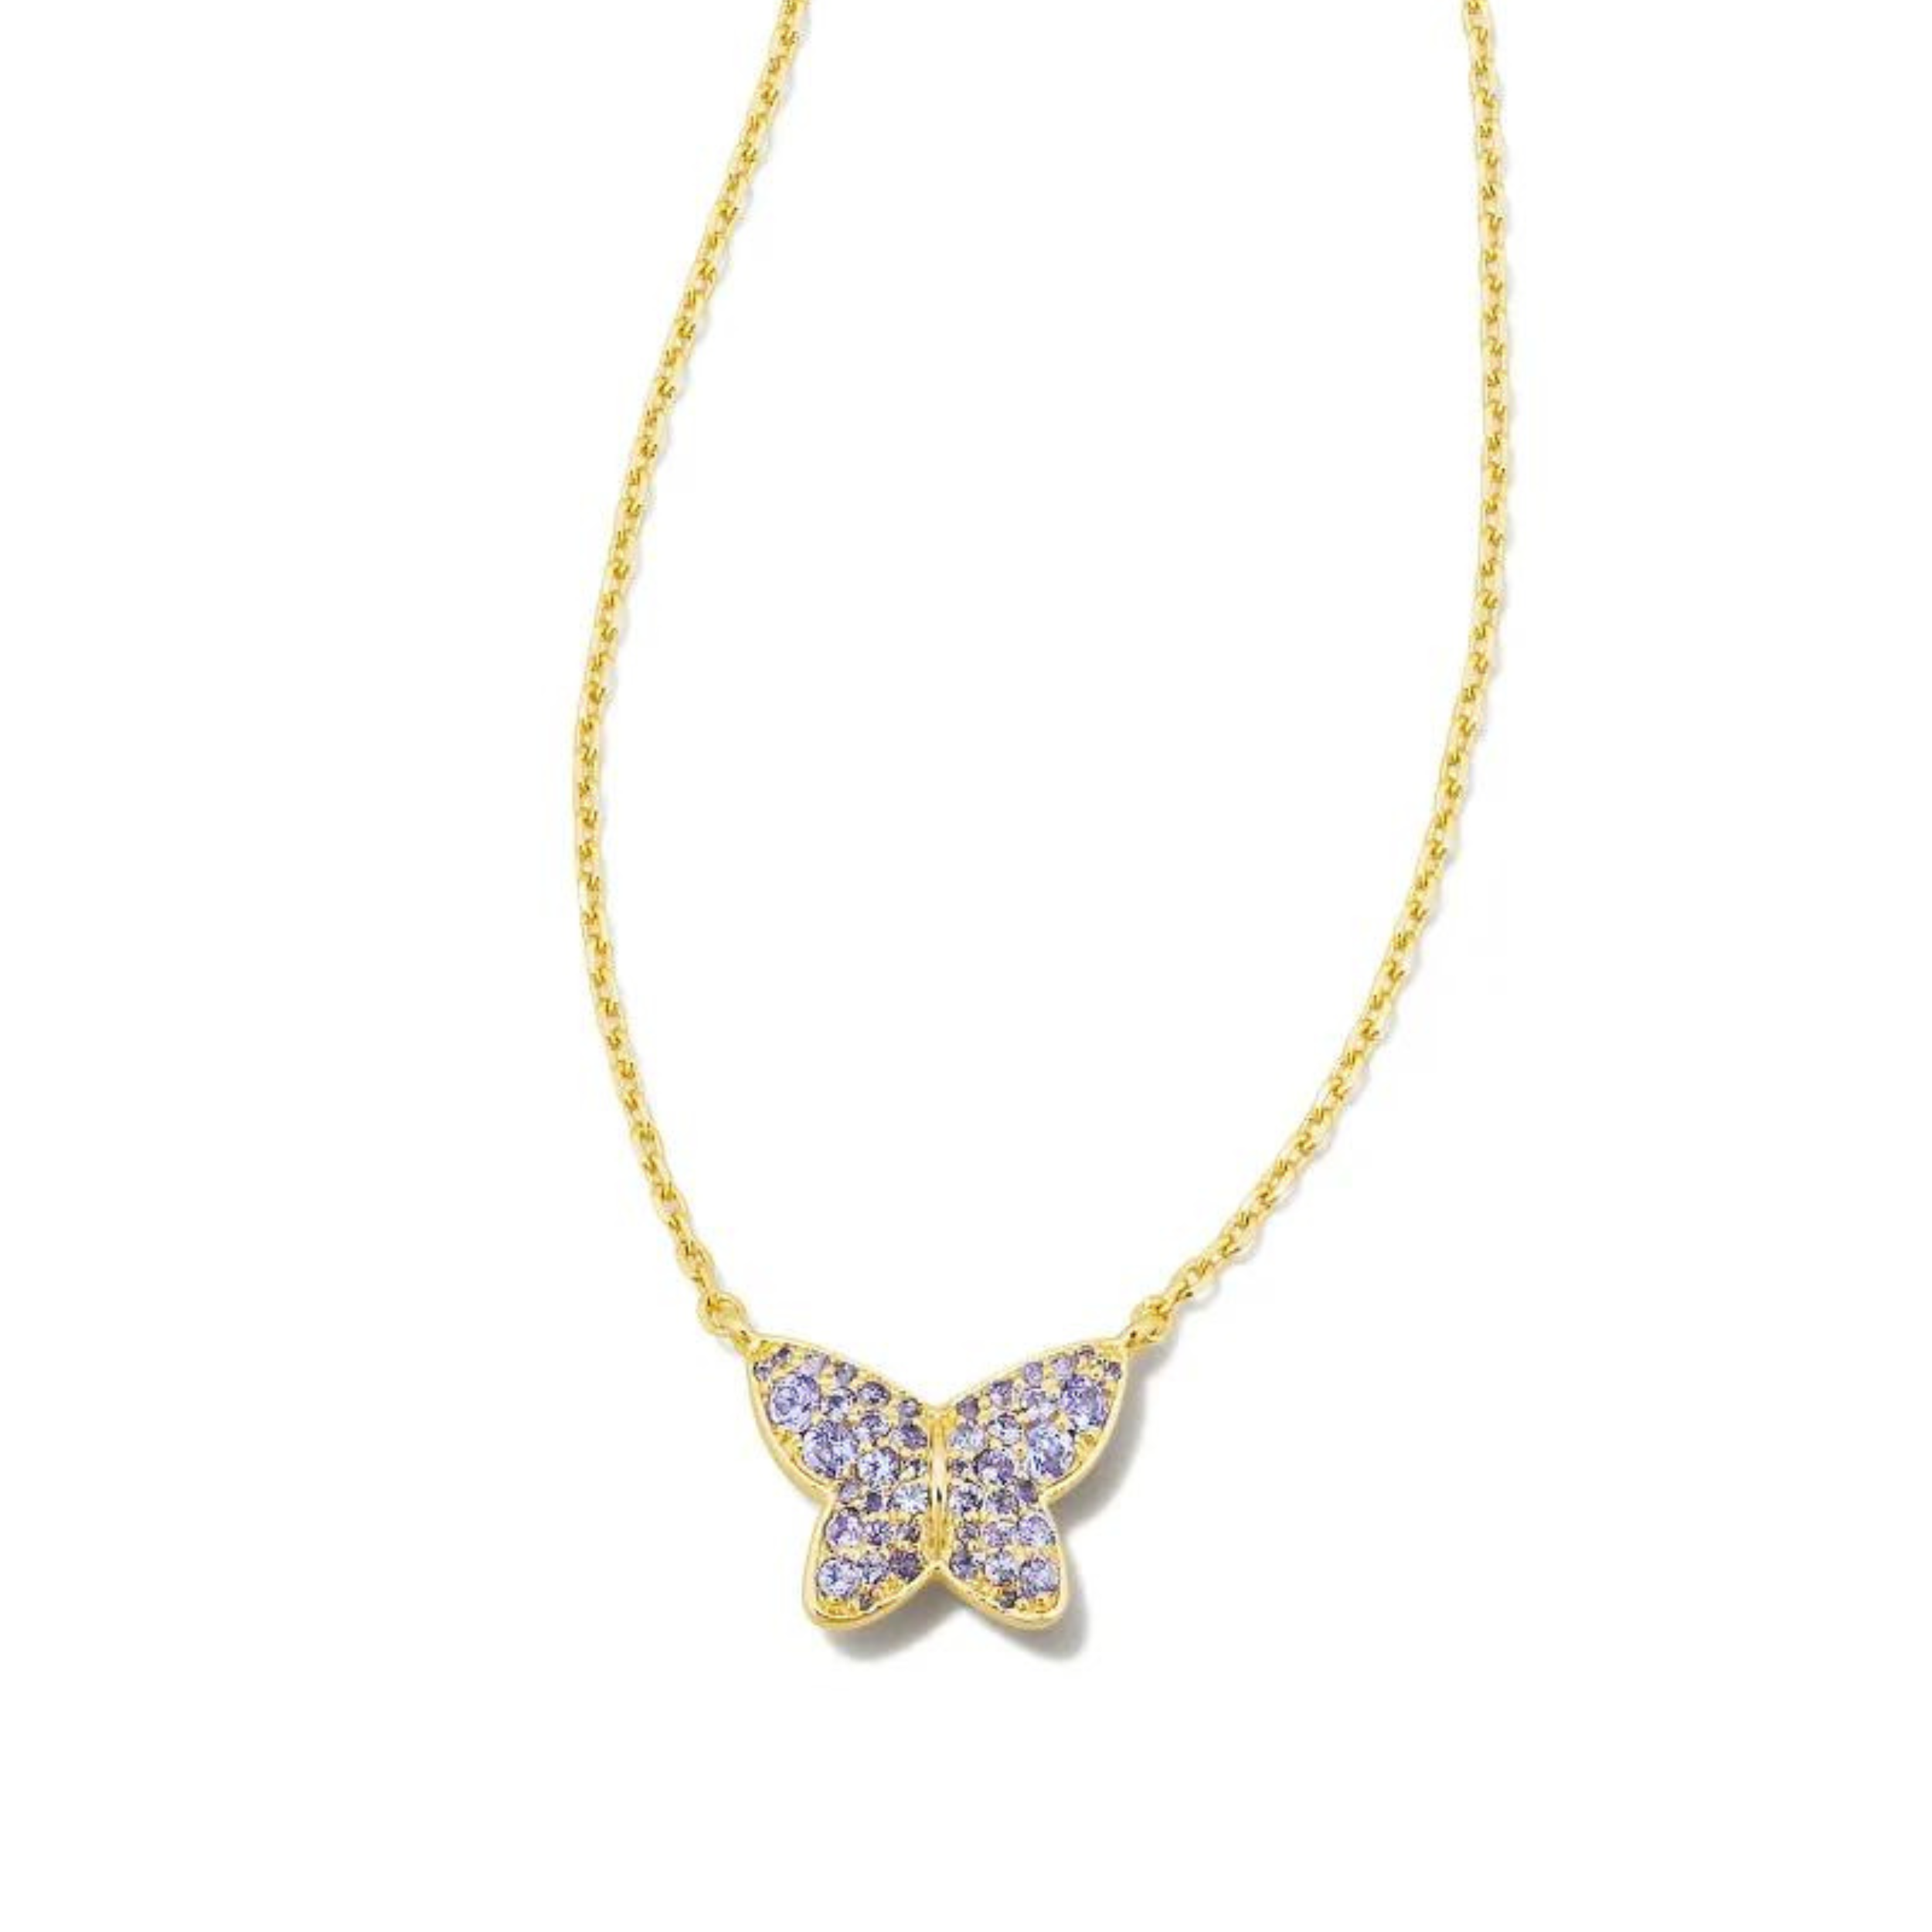 Gold necklace with a butterfly pendant with violet crystals, pictured on a white background.